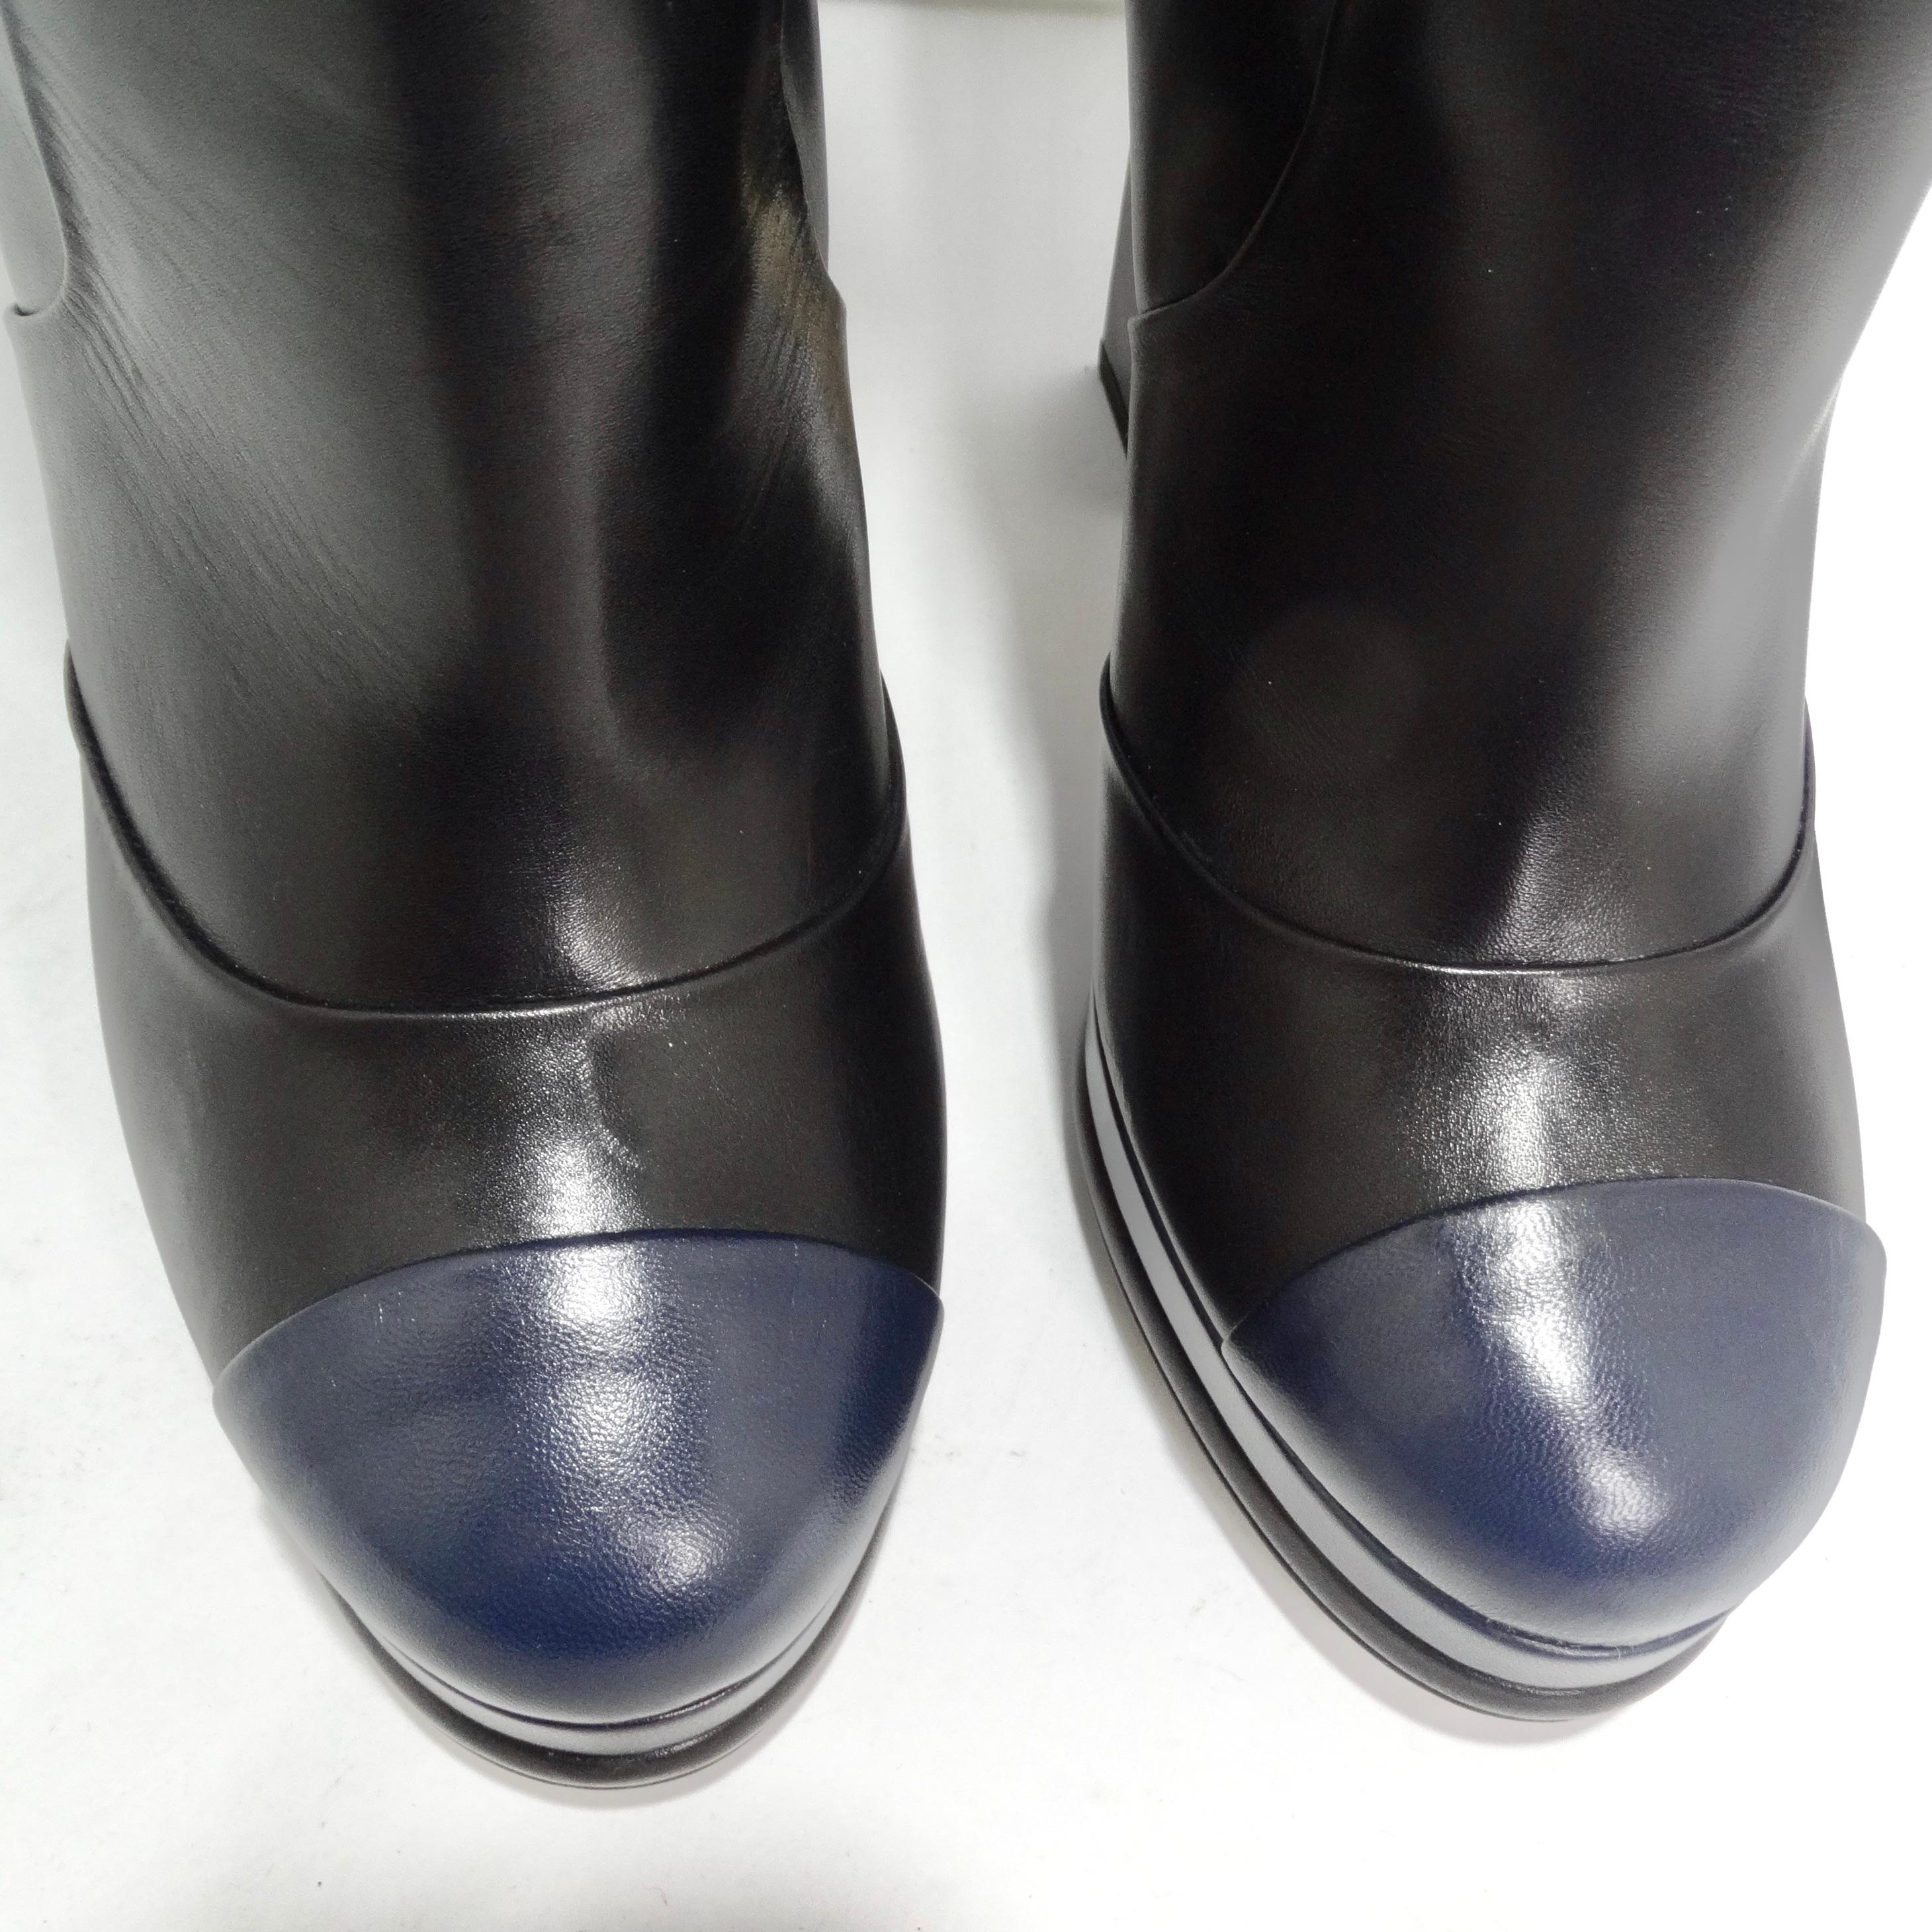 Chanel Black/Navy Blue Leather CC Boots In Excellent Condition For Sale In Scottsdale, AZ